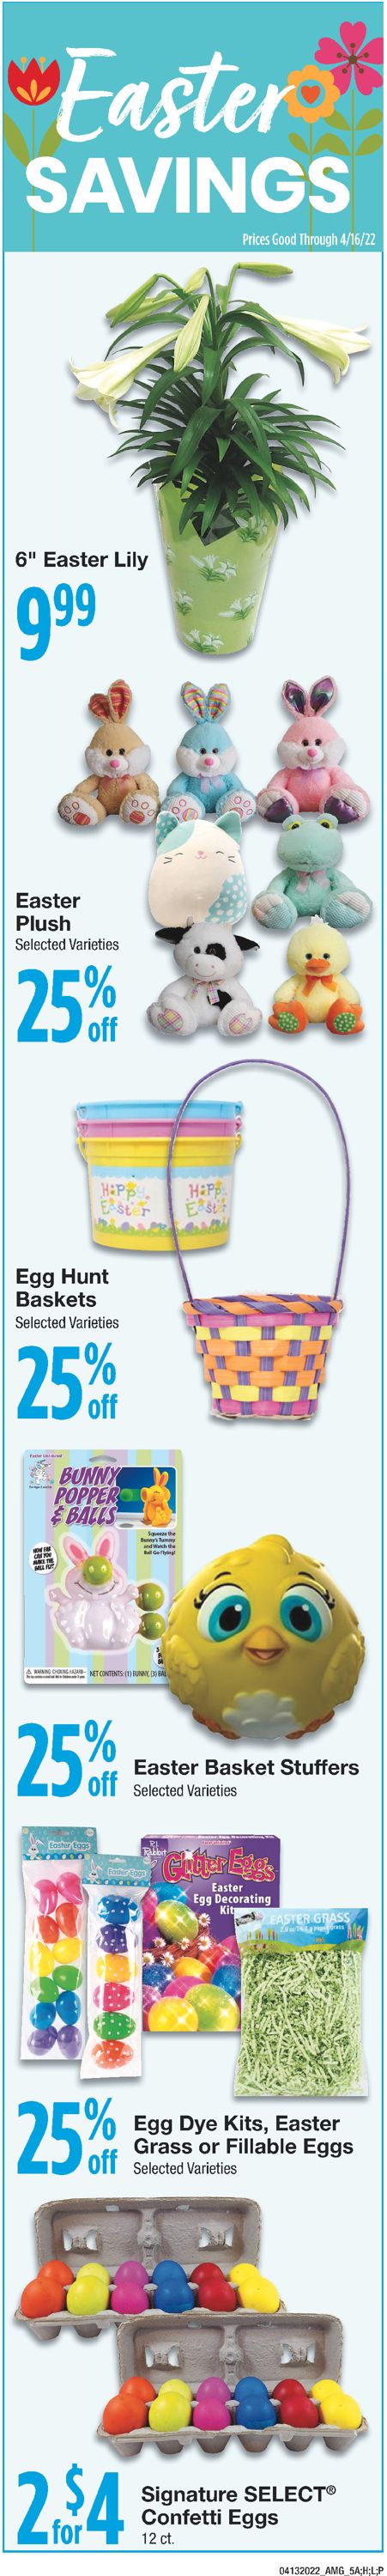 United Supermarkets EASTER AD 2022 Weekly Ad Circular - valid 04/13-04/19/2022 (Page 5)